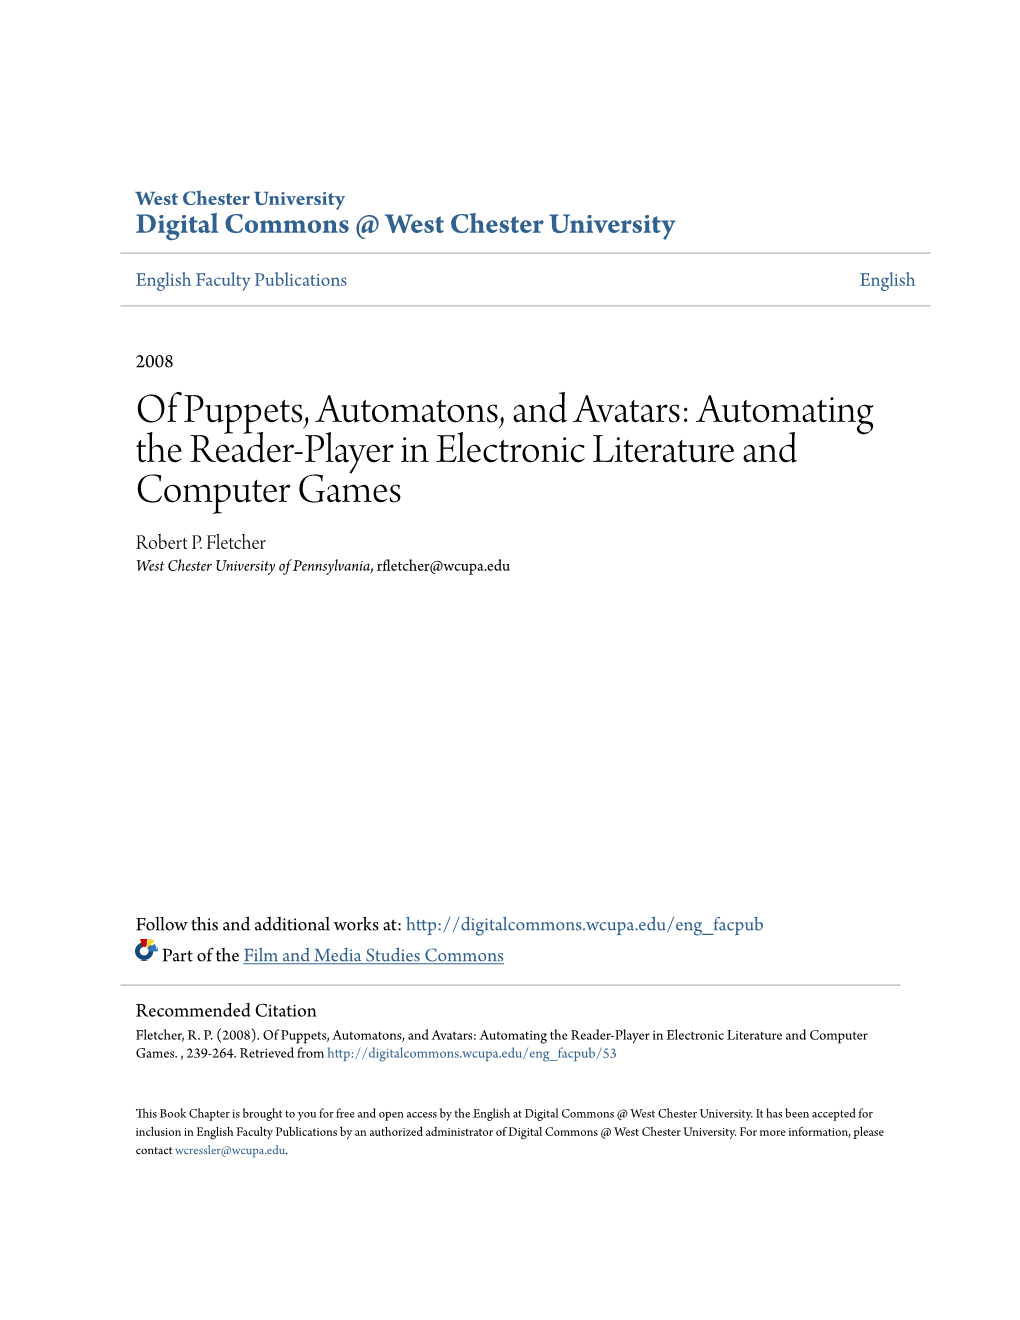 Of Puppets, Automatons, and Avatars: Automating the Reader-Player in Electronic Literature and Computer Games Robert P